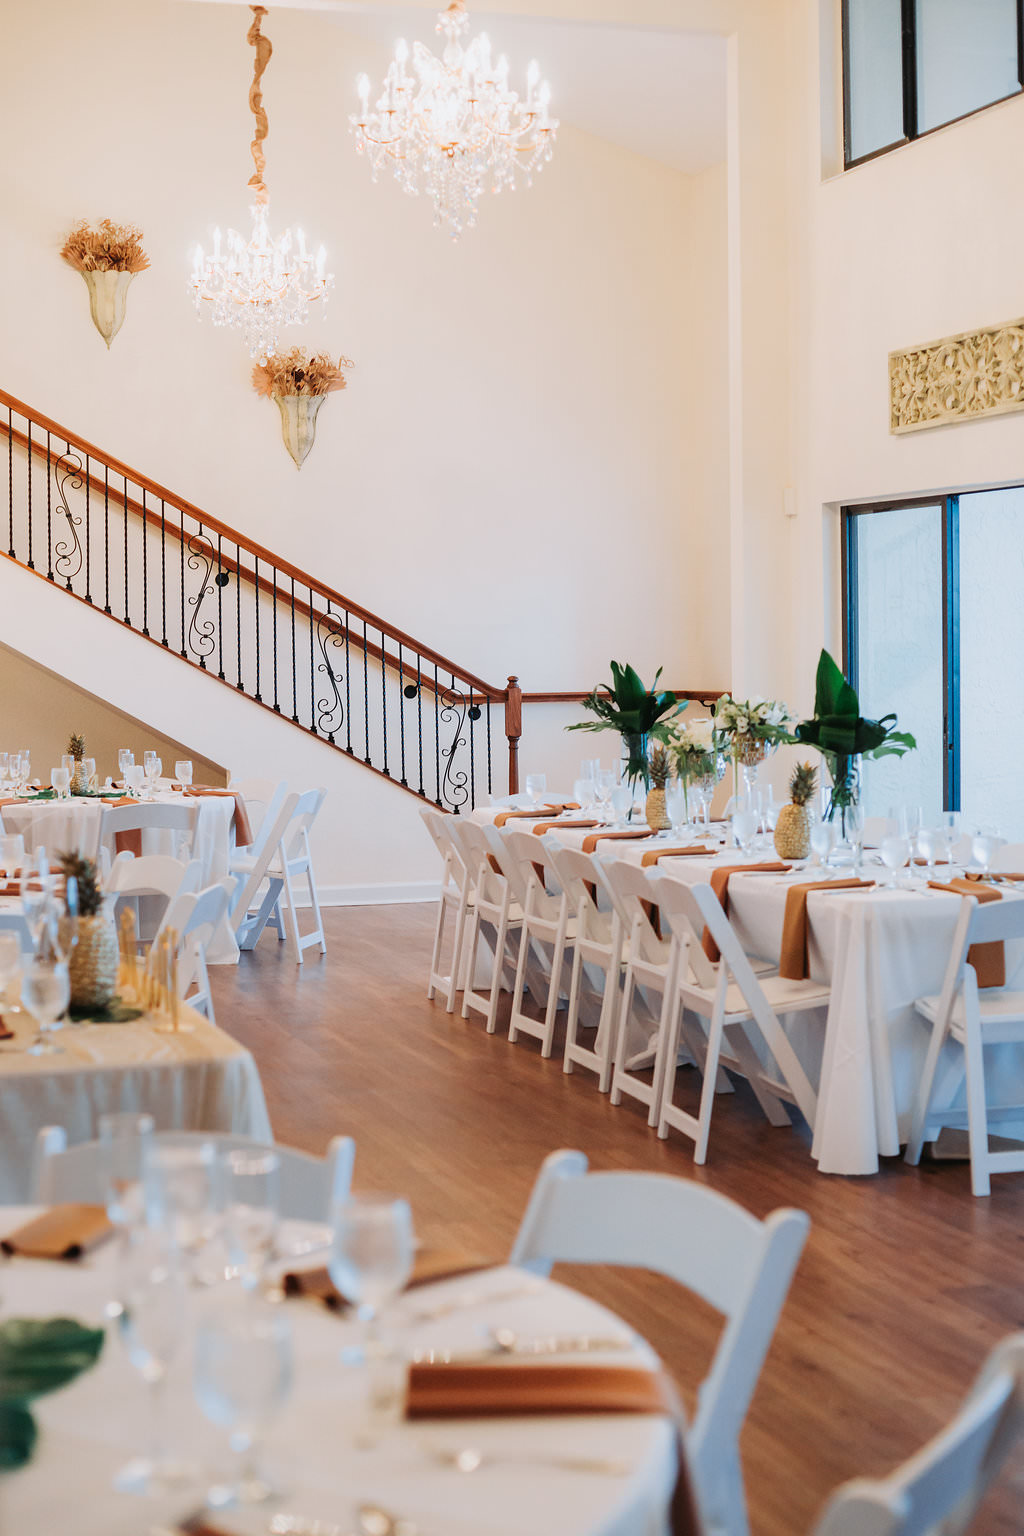 Indoor Hotel Ballroom Wedding Reception with Tan and White Table Linens, Pineapple and Tropical Greenery Centerpieces, and White Folding Chairs | Tampa Bay Waterfront Venue Beso Del Sol